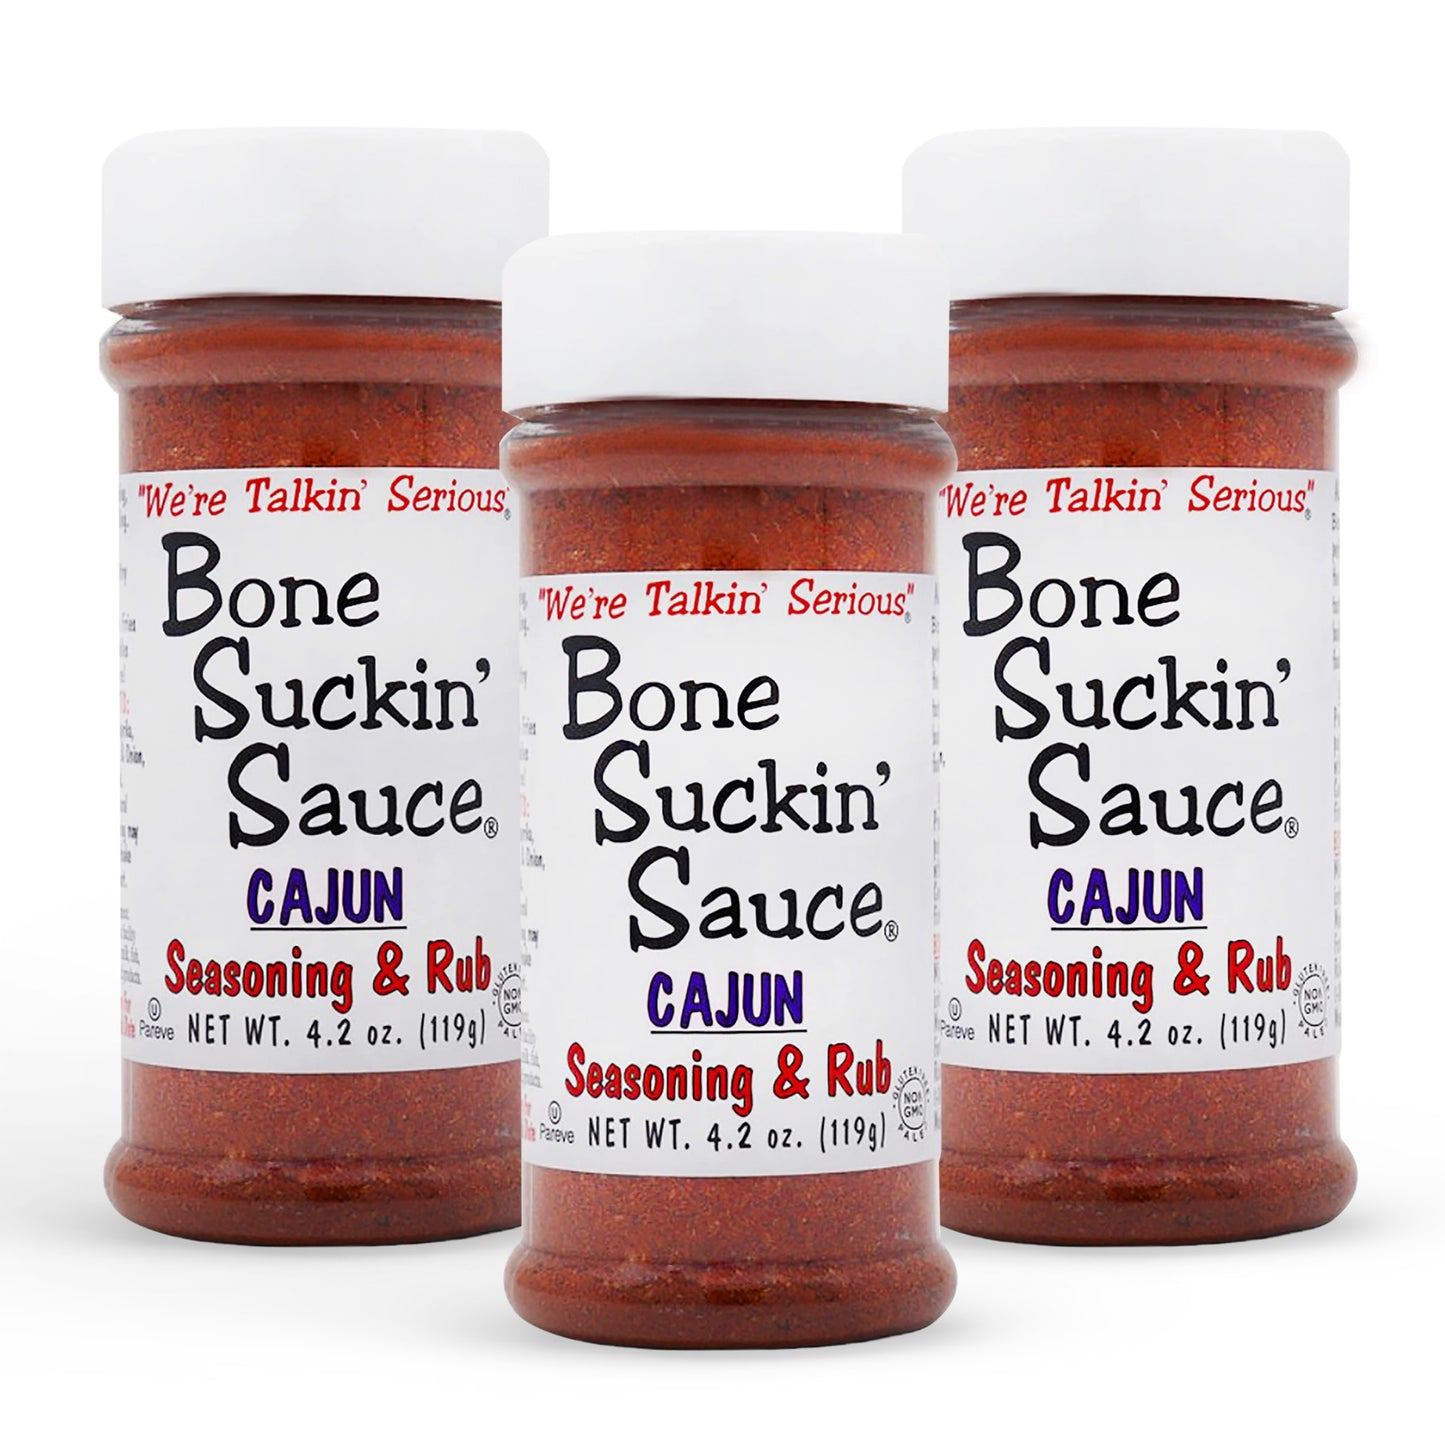 Bone Suckin'® Cajun Seasoning & Rub, 4.2 oz., is the perfect blend of Cajun spices & herbs along with the right amount of heat. It makes your food taste great, gets friends talking & coming back for more! Use generously & your Cajun food will be "Bone Suckin'® Good!" Use On Seafood, Poultry, Steaks, Pork, Pasta, French Fries, Rice, Vegetables, Gumbos, Jambalayas & more! 3 pack